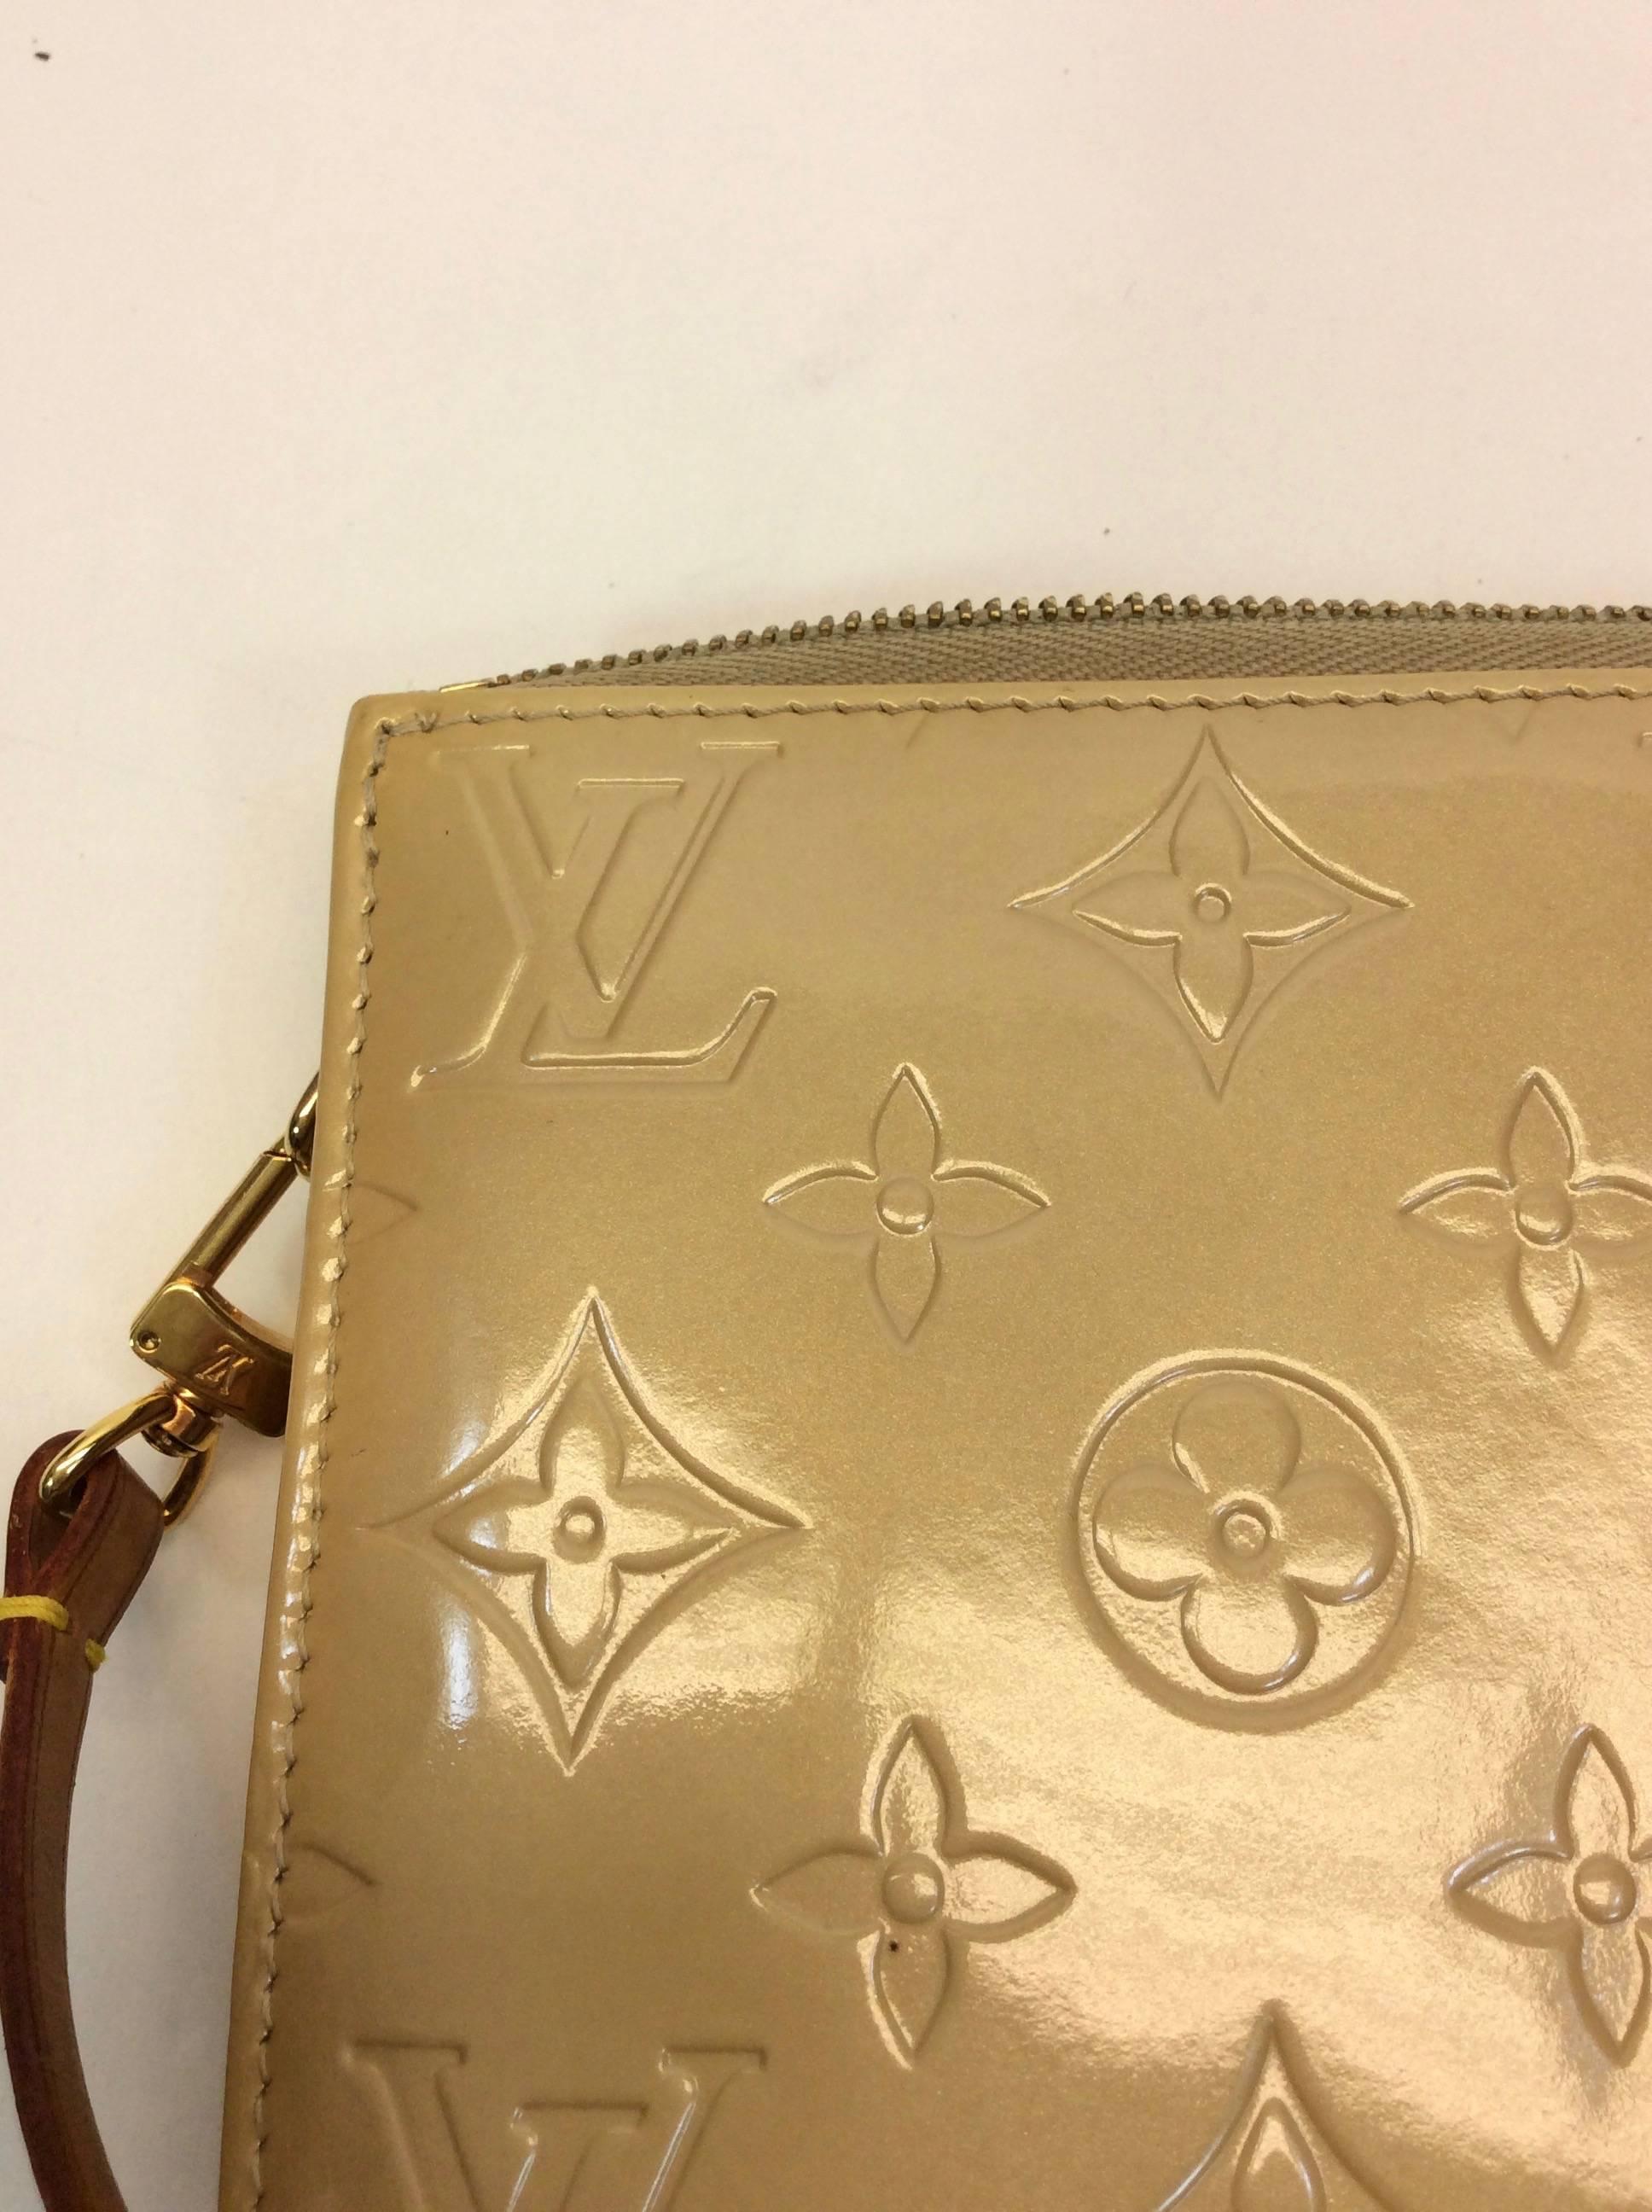 Louis Vuitton Small Tan Patent Leather Monogrammed Handbag In Excellent Condition For Sale In Narberth, PA